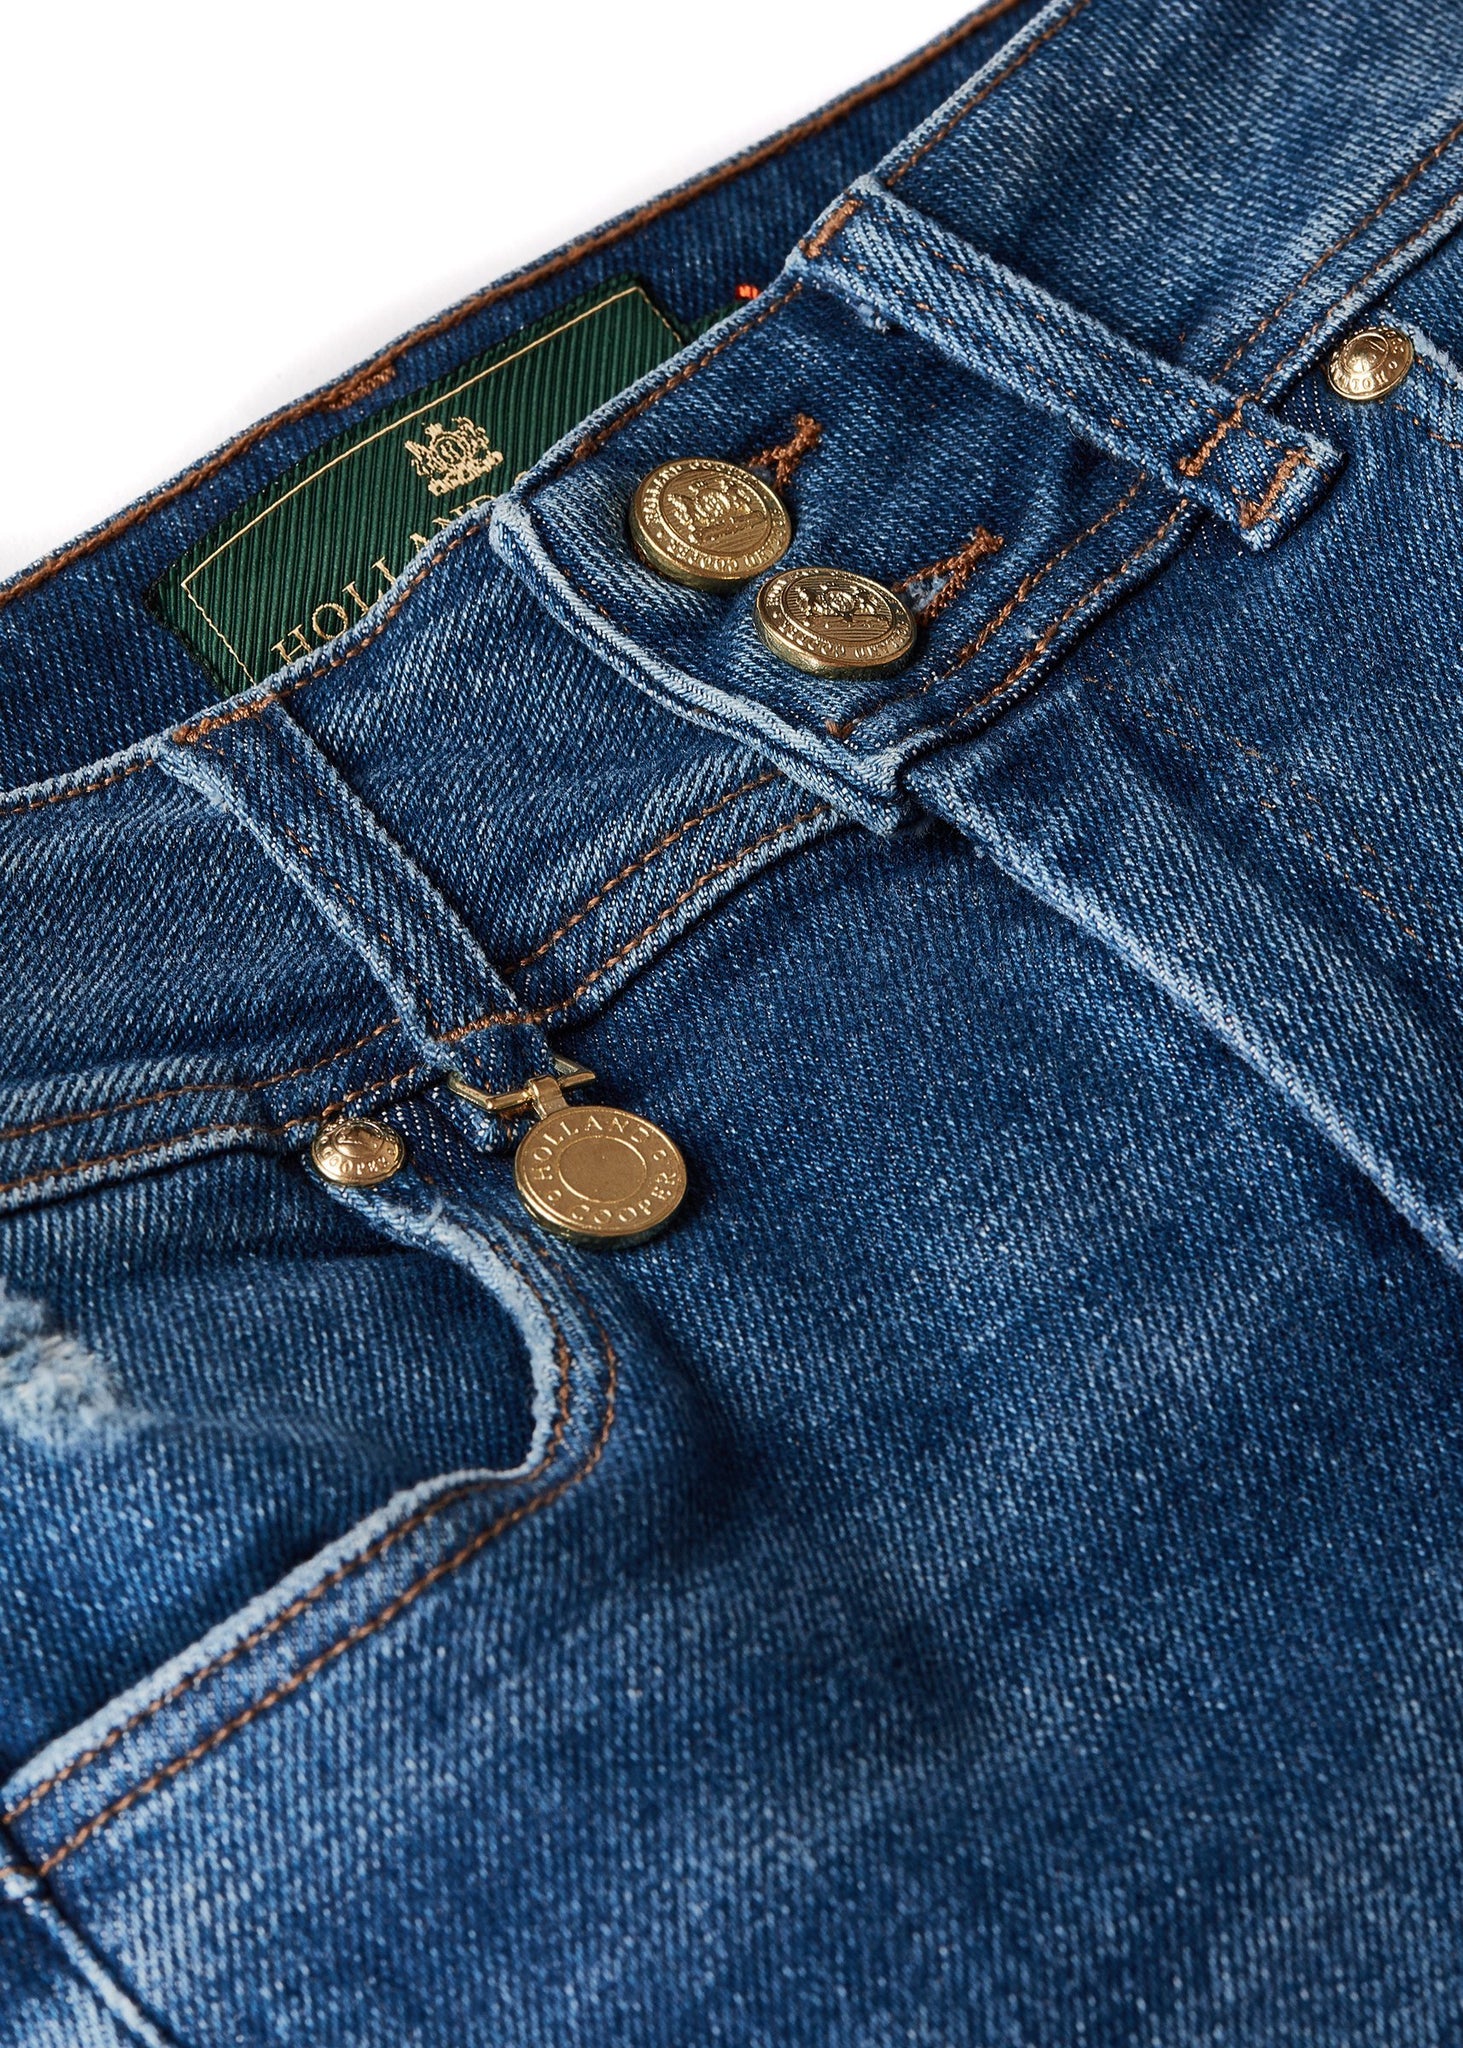 gold charm on belt loop detail on womens high rise blue distressed denim skinny stretch jean with jodhpur style seams and two open pockets to the front with hc embroidery on front left pocket